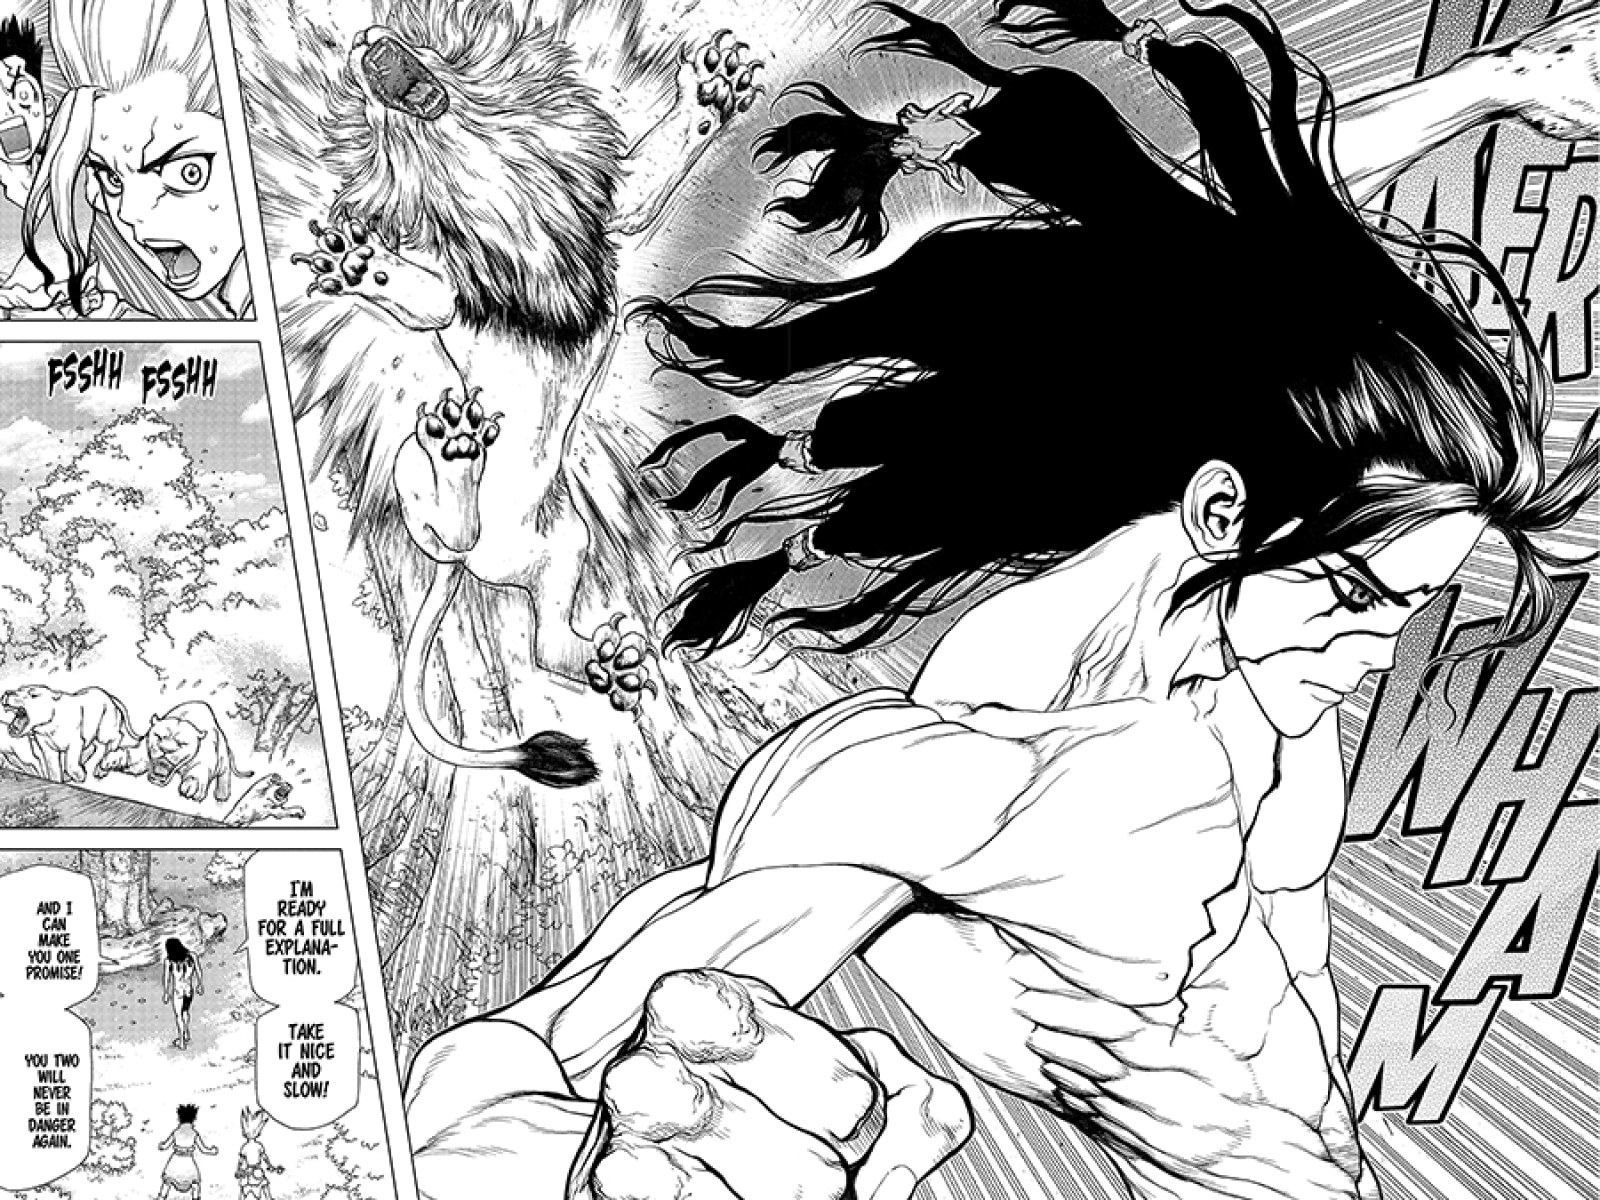 Dr.Stone' Creators Discuss Playing God & Shonen Jump Style at Anime NYC